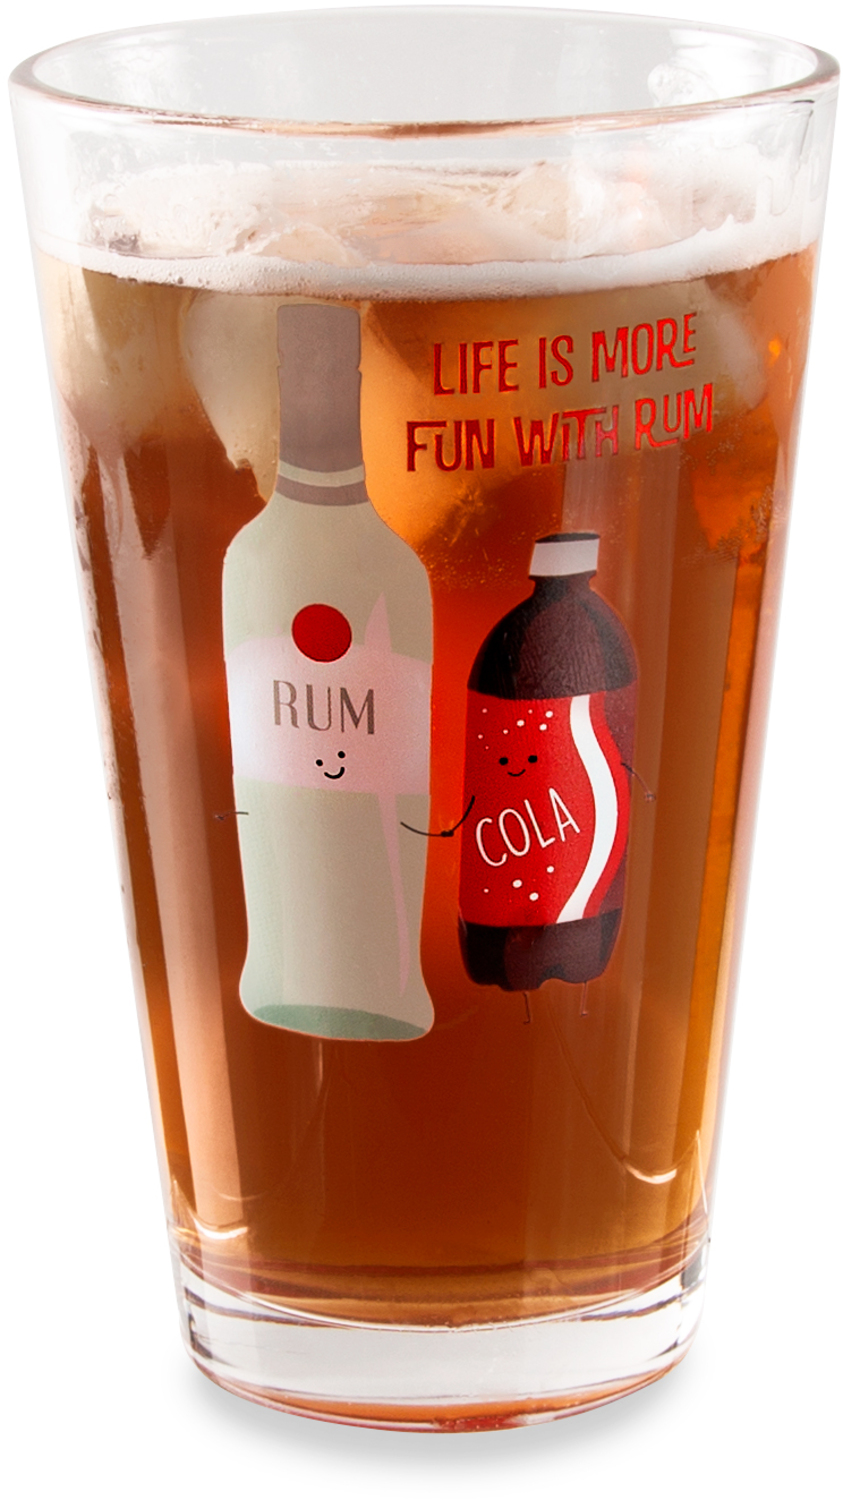 Rum & Cola by Late Night Last Call - Rum & Cola - 16 oz Pint Glass Tumbler